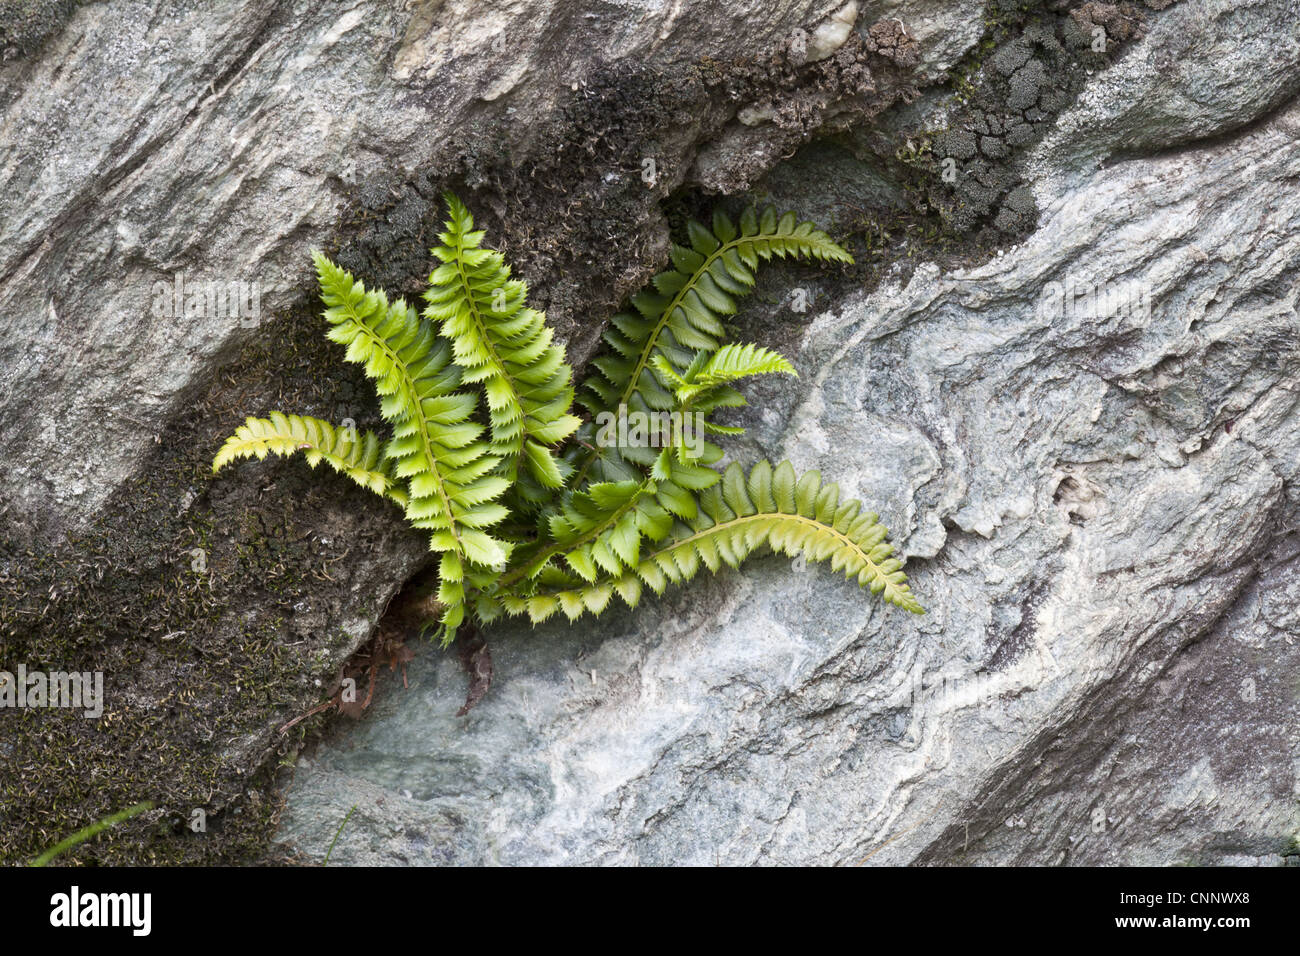 Holly Fern (Polystichum lonchitis) fronds, growing in rock crevice, Valgrisenche, Aosta Valley, Italian Alps, Italy, july Stock Photo